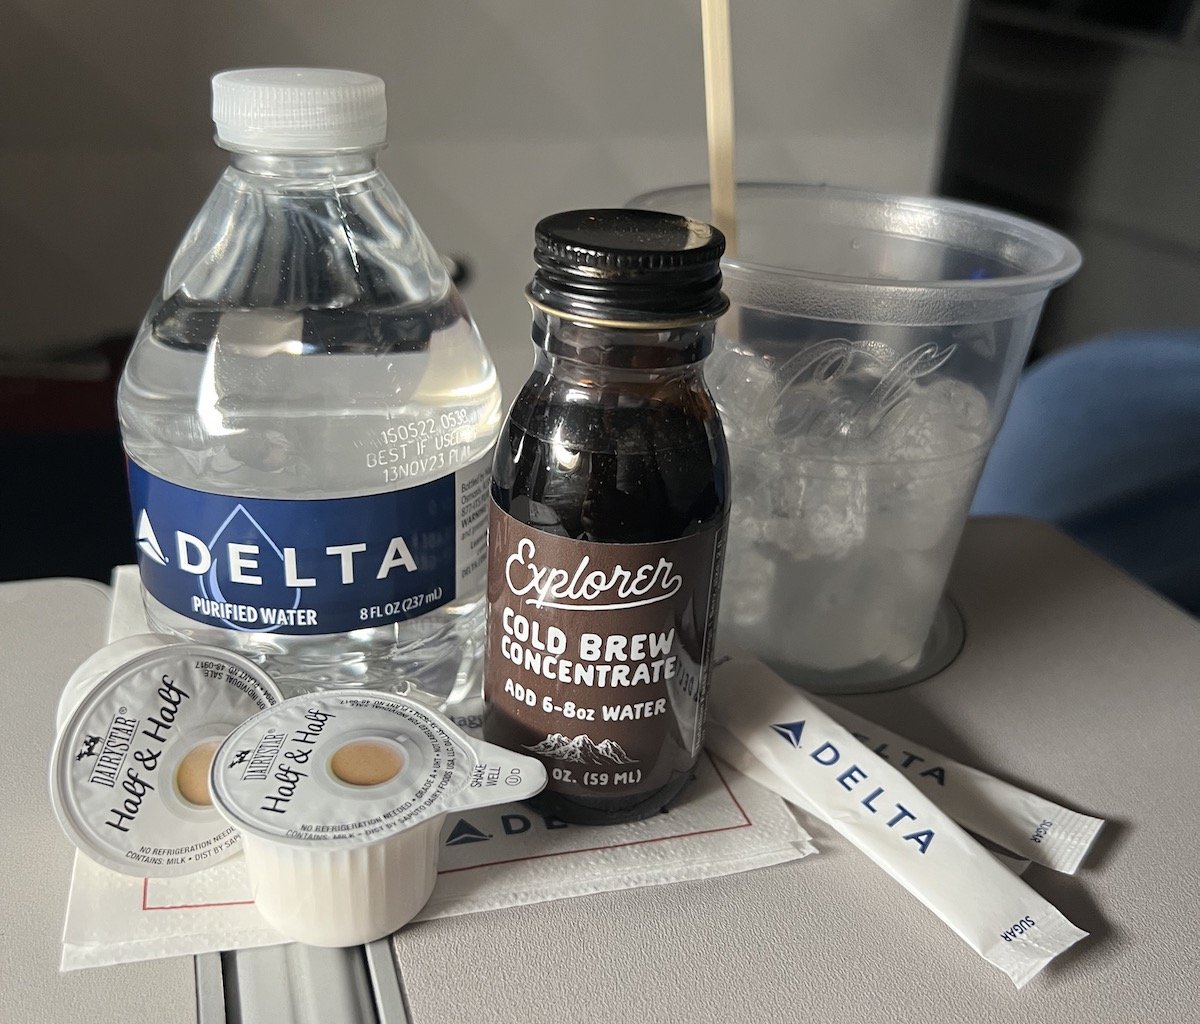 Delta Adds Explorer Cold Brew To Drink Lineup